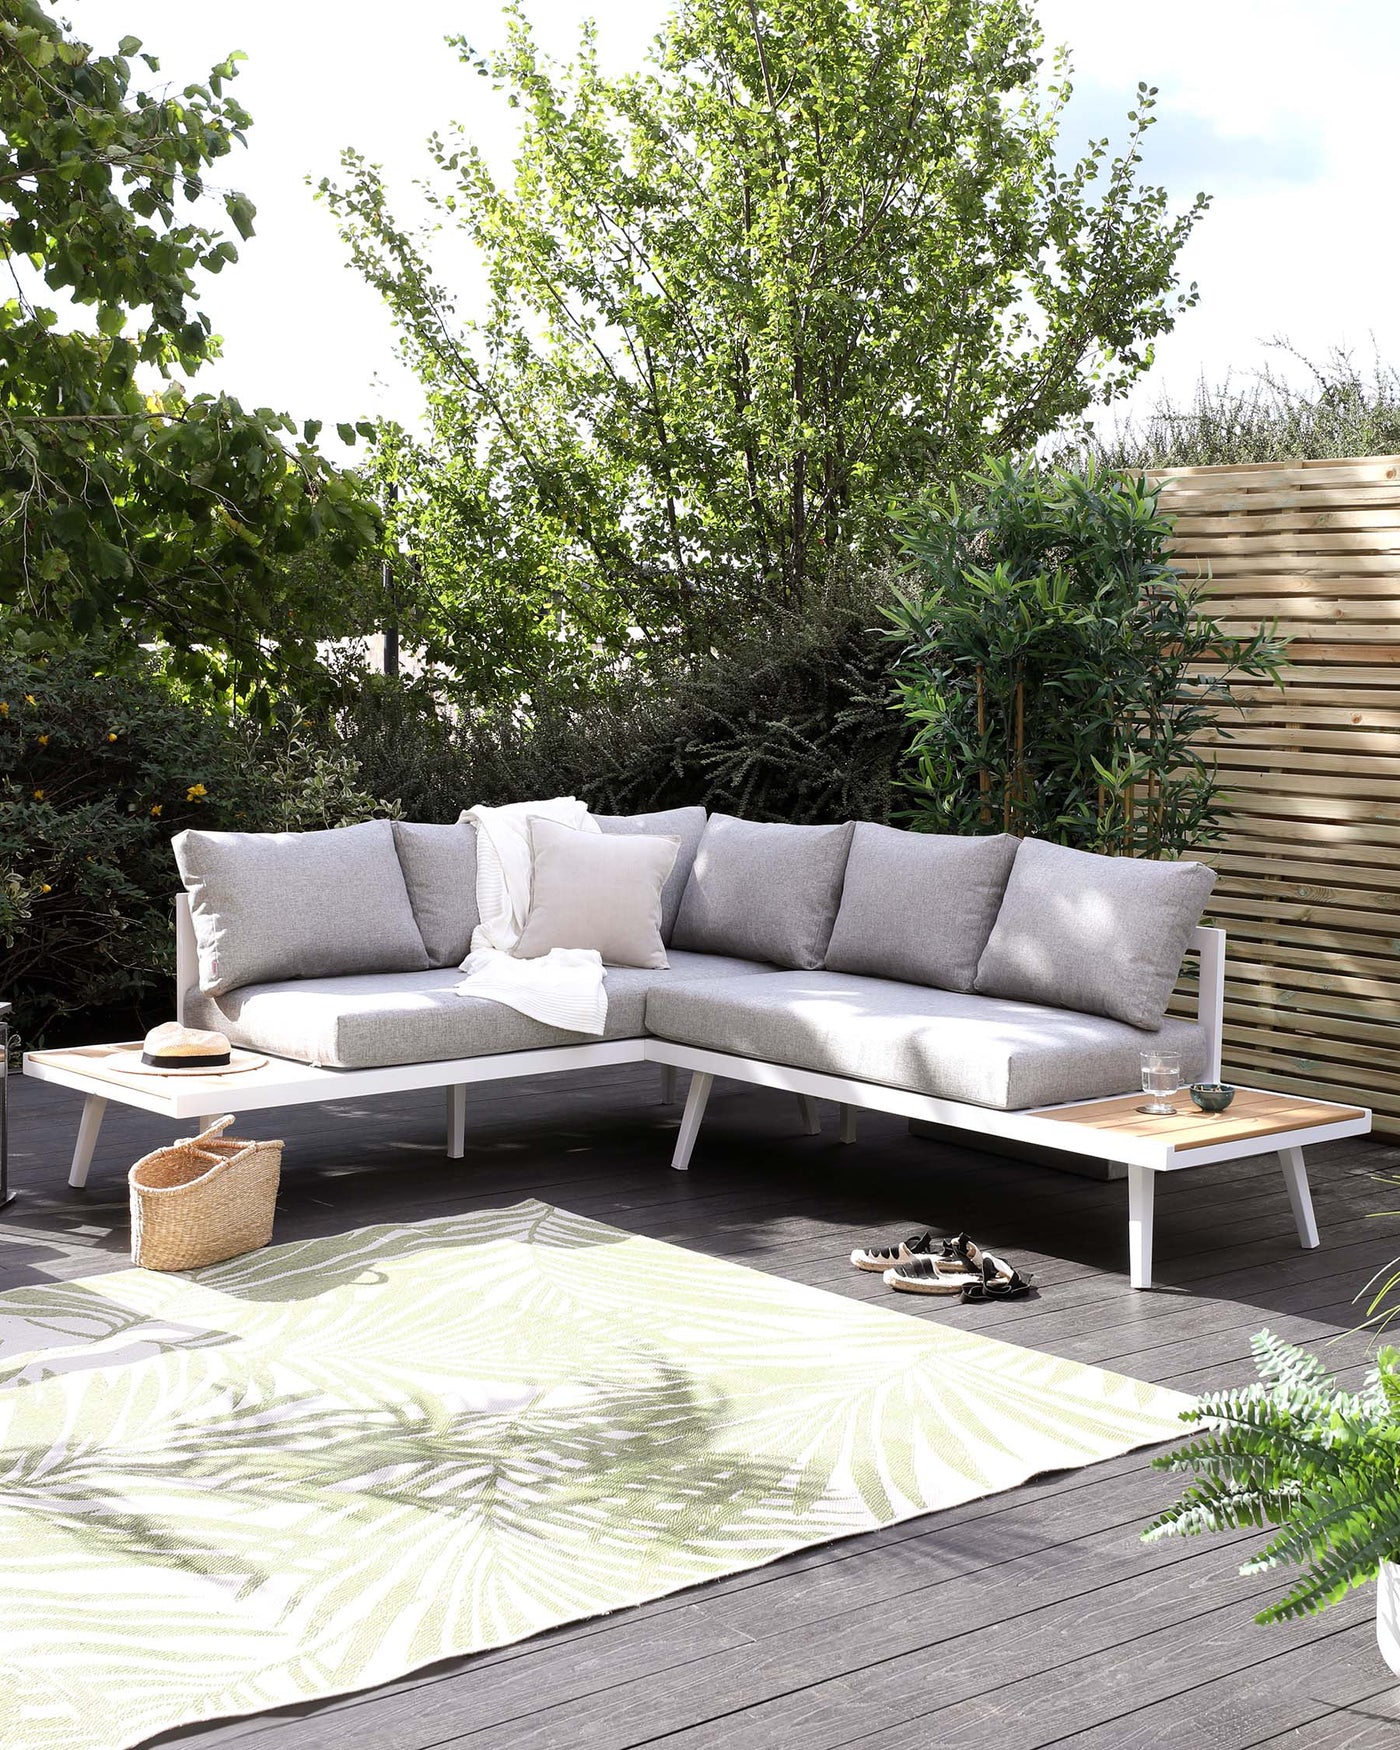 Outdoor sectional sofa with light grey cushions and a white frame, paired with a rectangular wooden coffee table on a patterned outdoor rug.